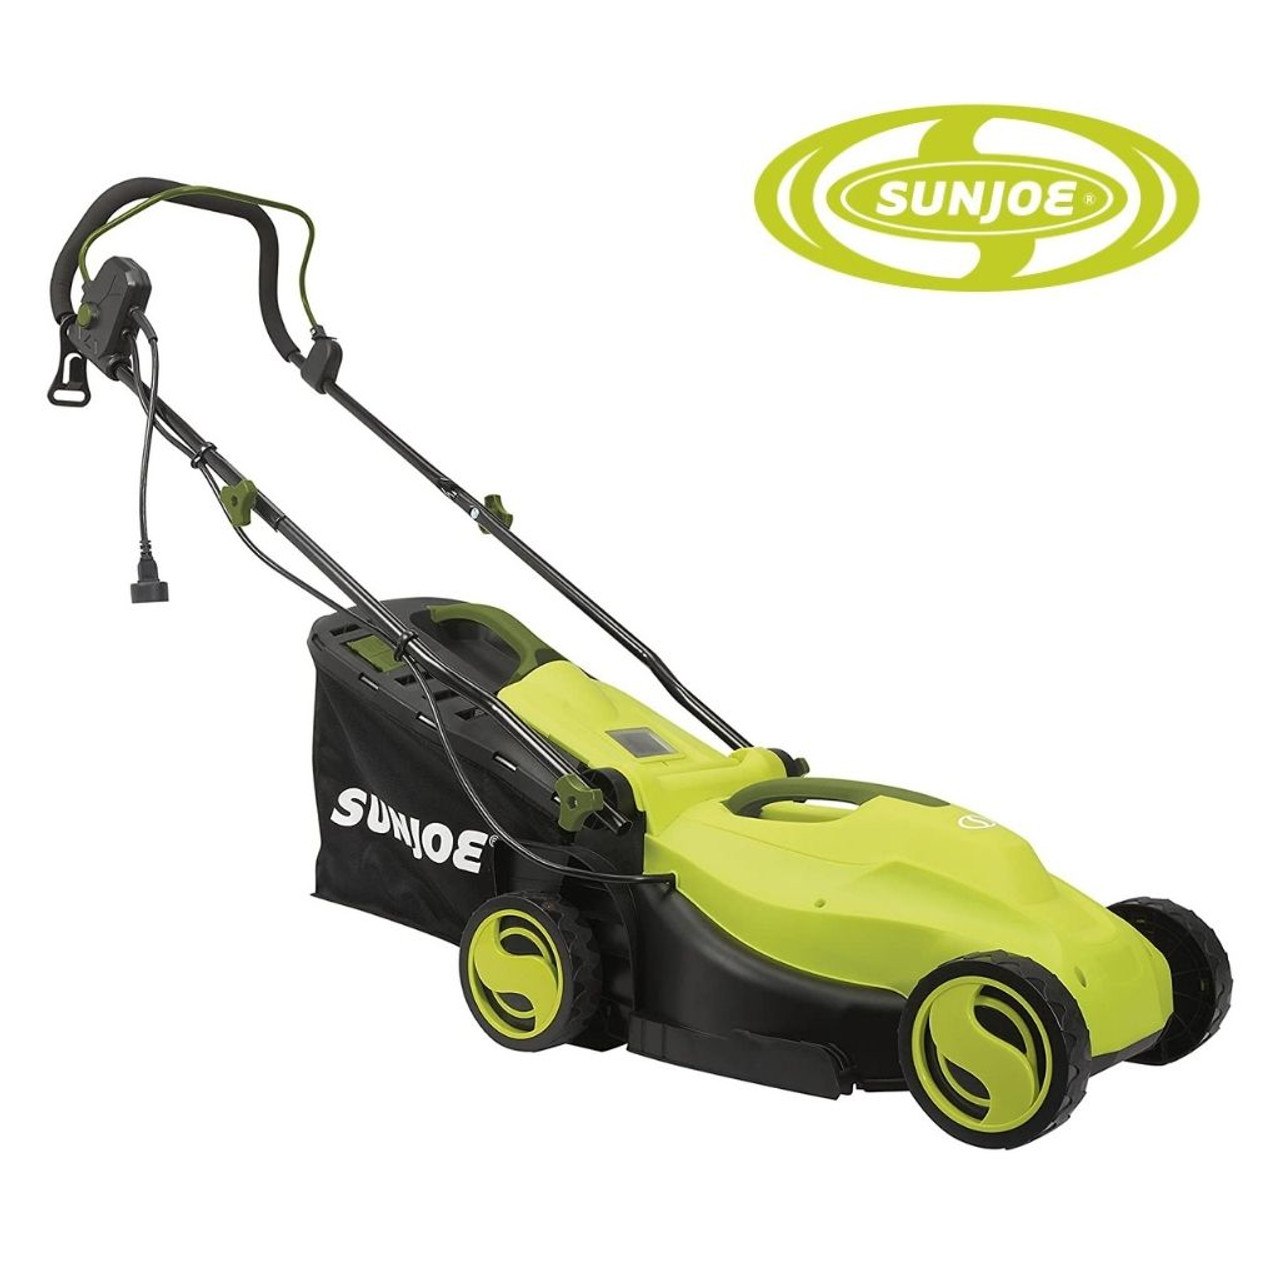 Sun Joe Electric Lawn Mower with Grass Collection Bag  $72.99 (51% OFF)